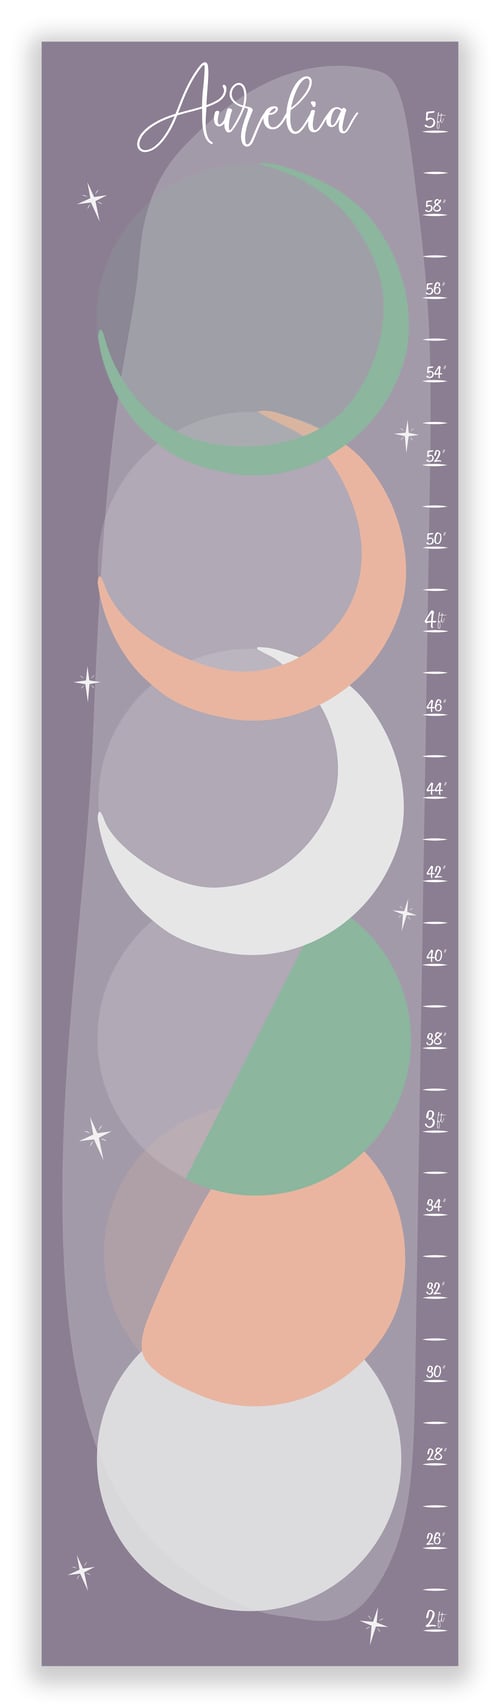 Image of Lavender and Mint Phases of the Moon Personalized Canvas Growth Chart